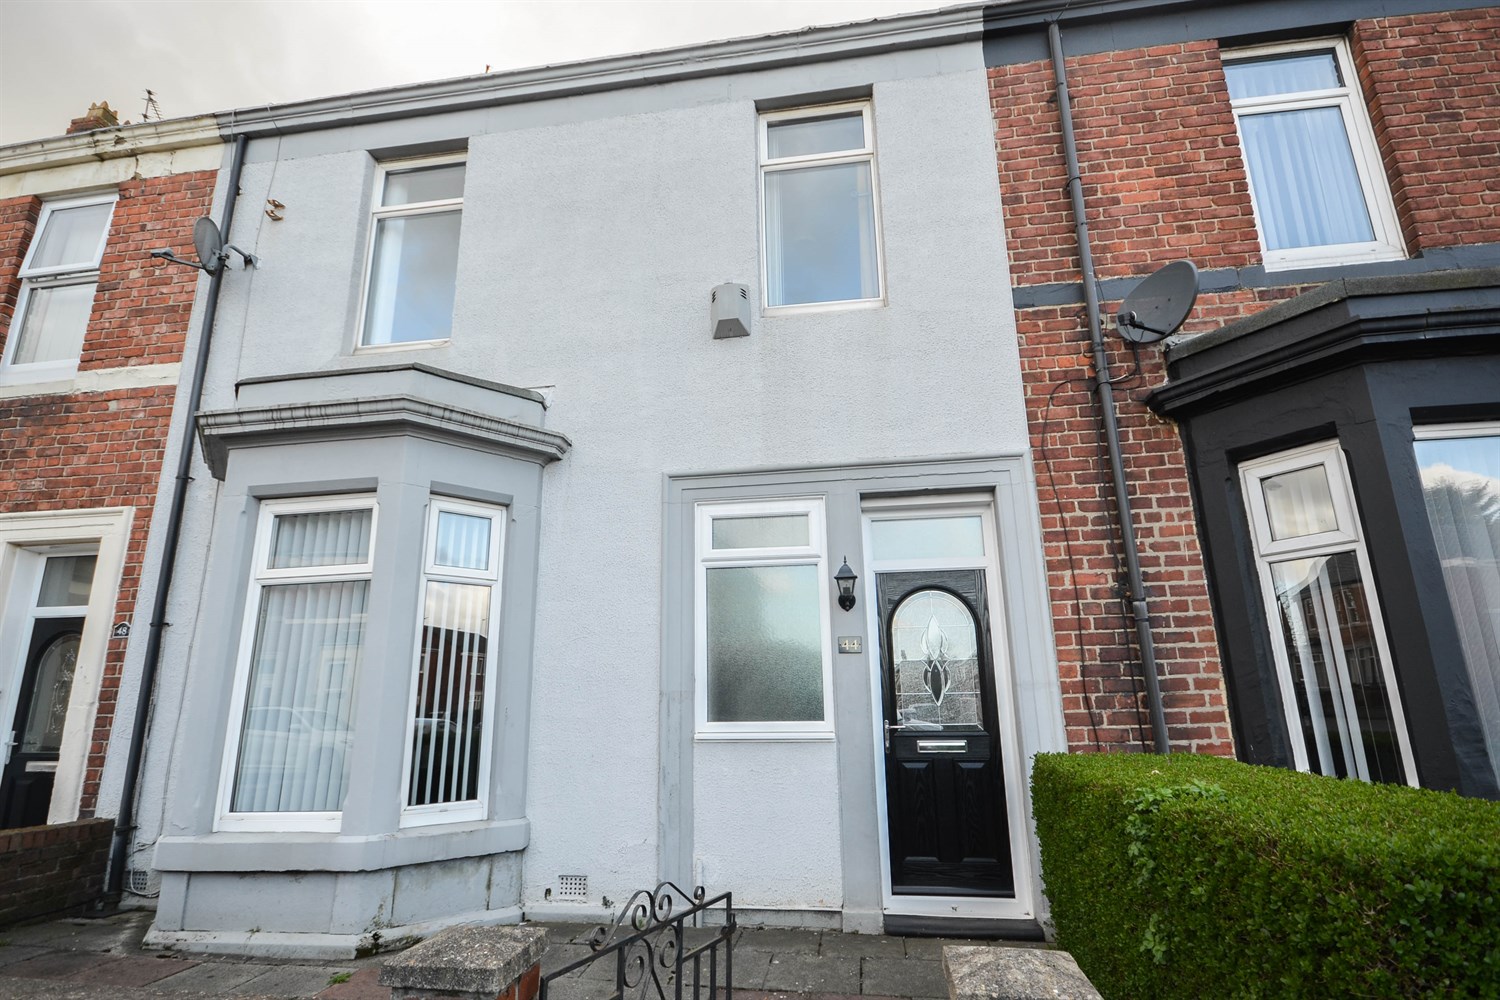 3 bed house for sale in Pine Street, Jarrow - Property Image 1